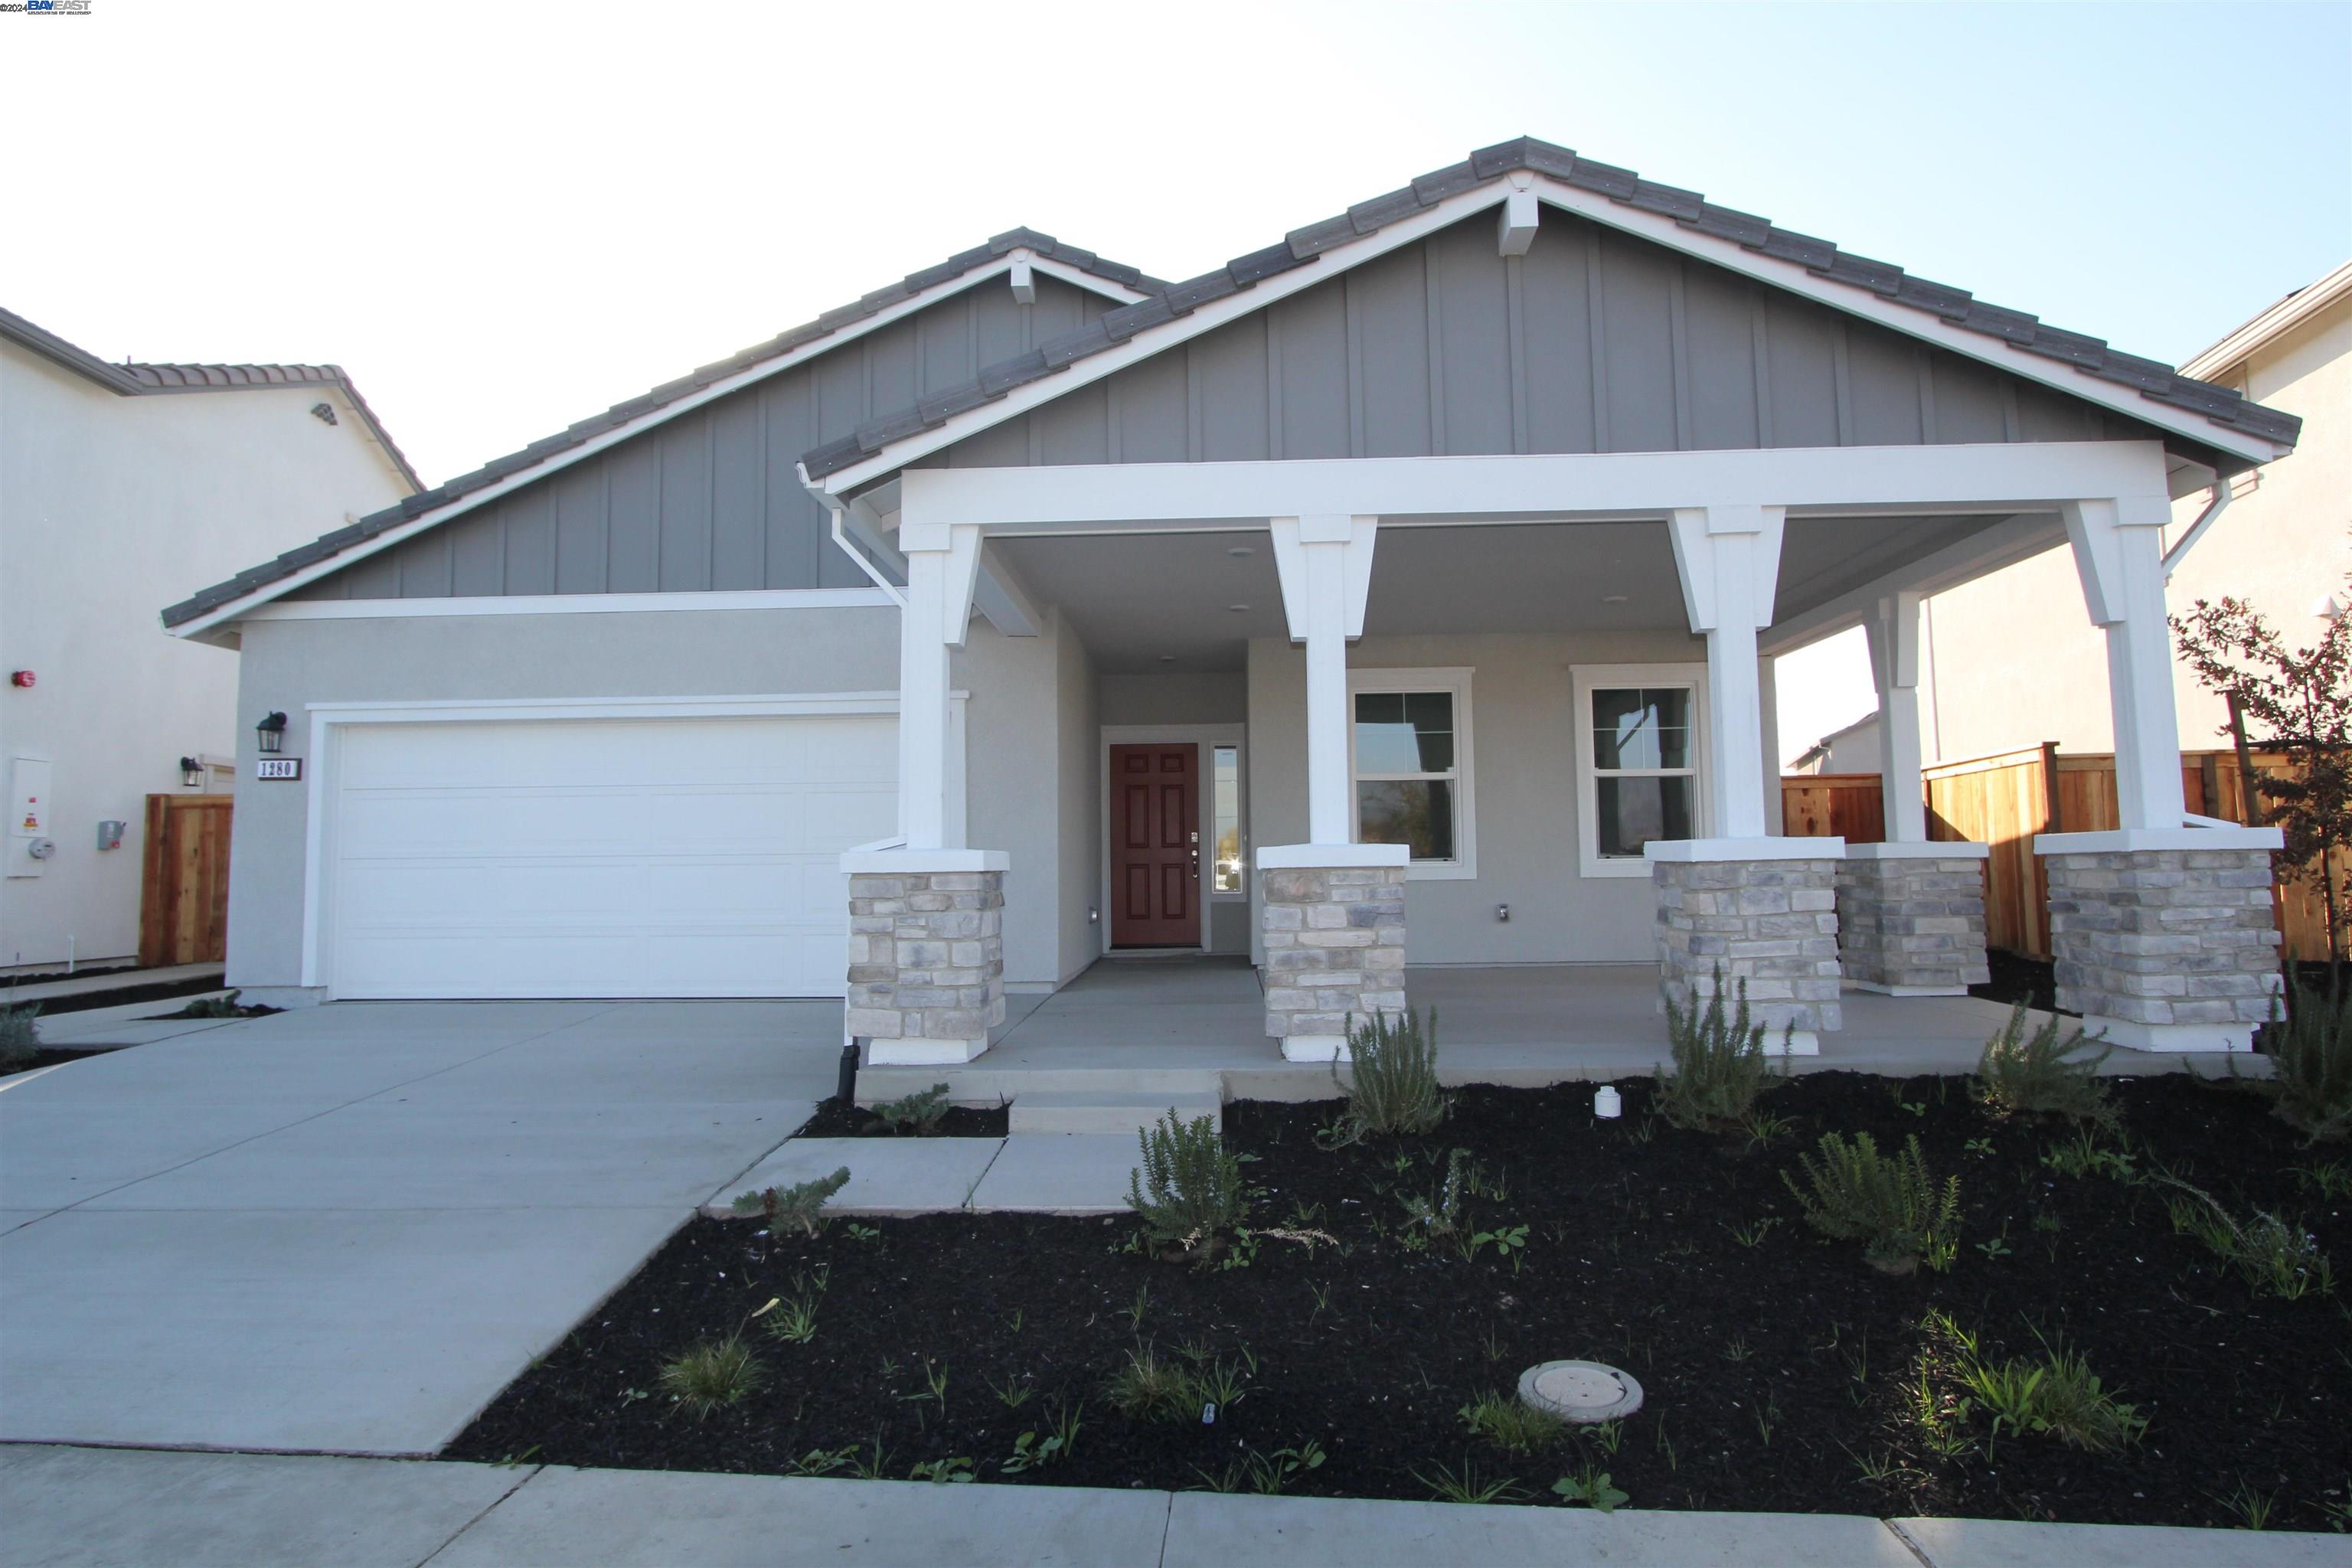 Detail Gallery Image 1 of 4 For 1280 Salinas River St, Lathrop,  CA 95330-7027 - 4 Beds | 3 Baths